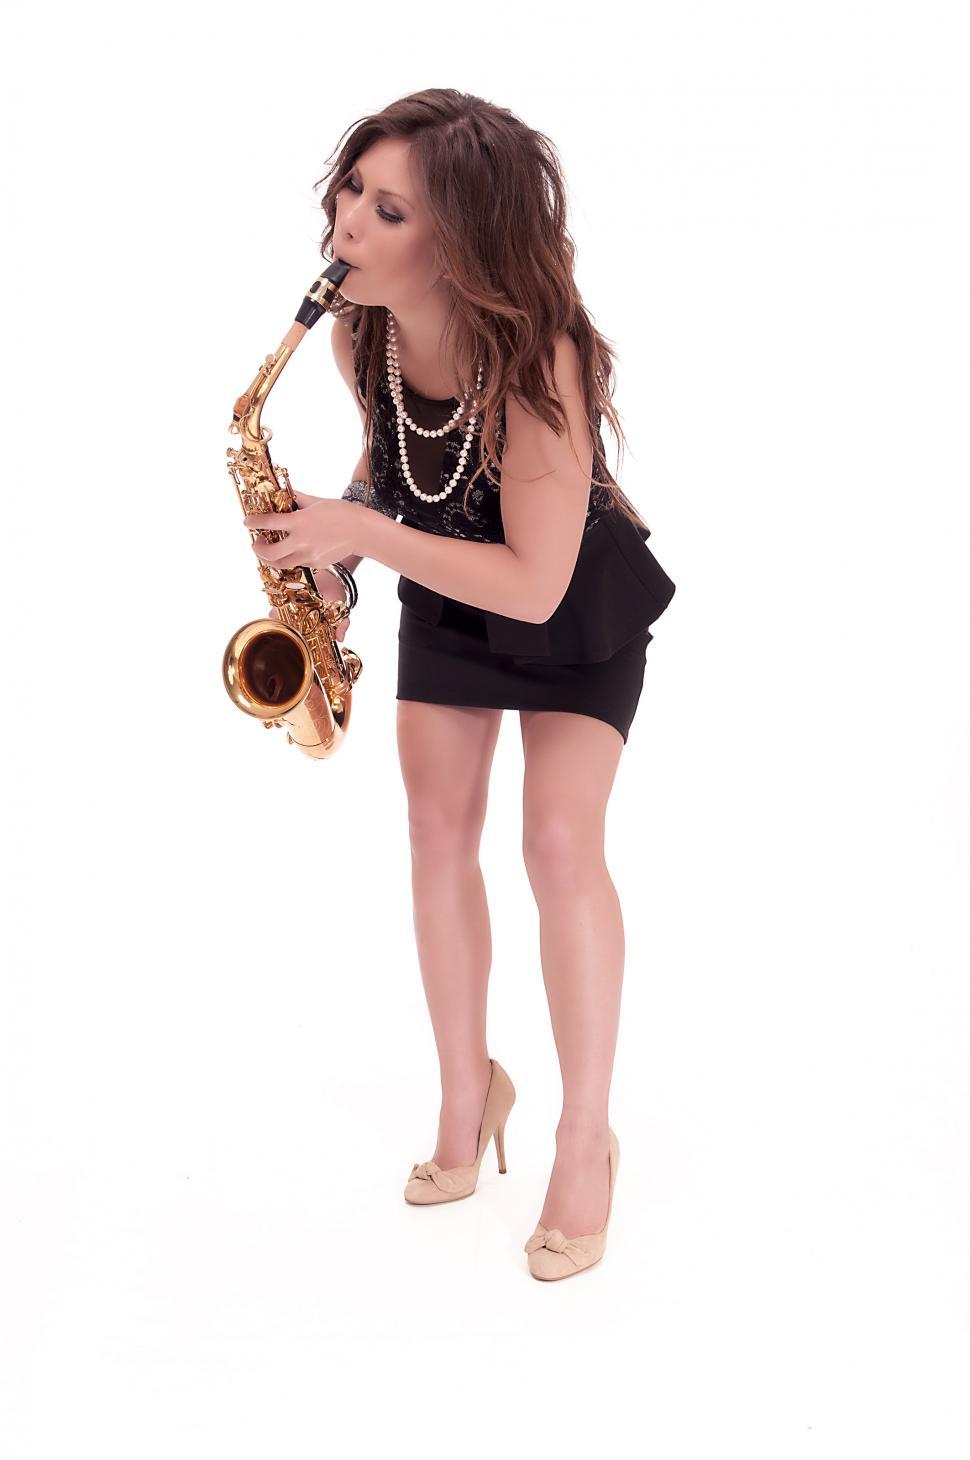 Free Image of Woman playing the saxophone 